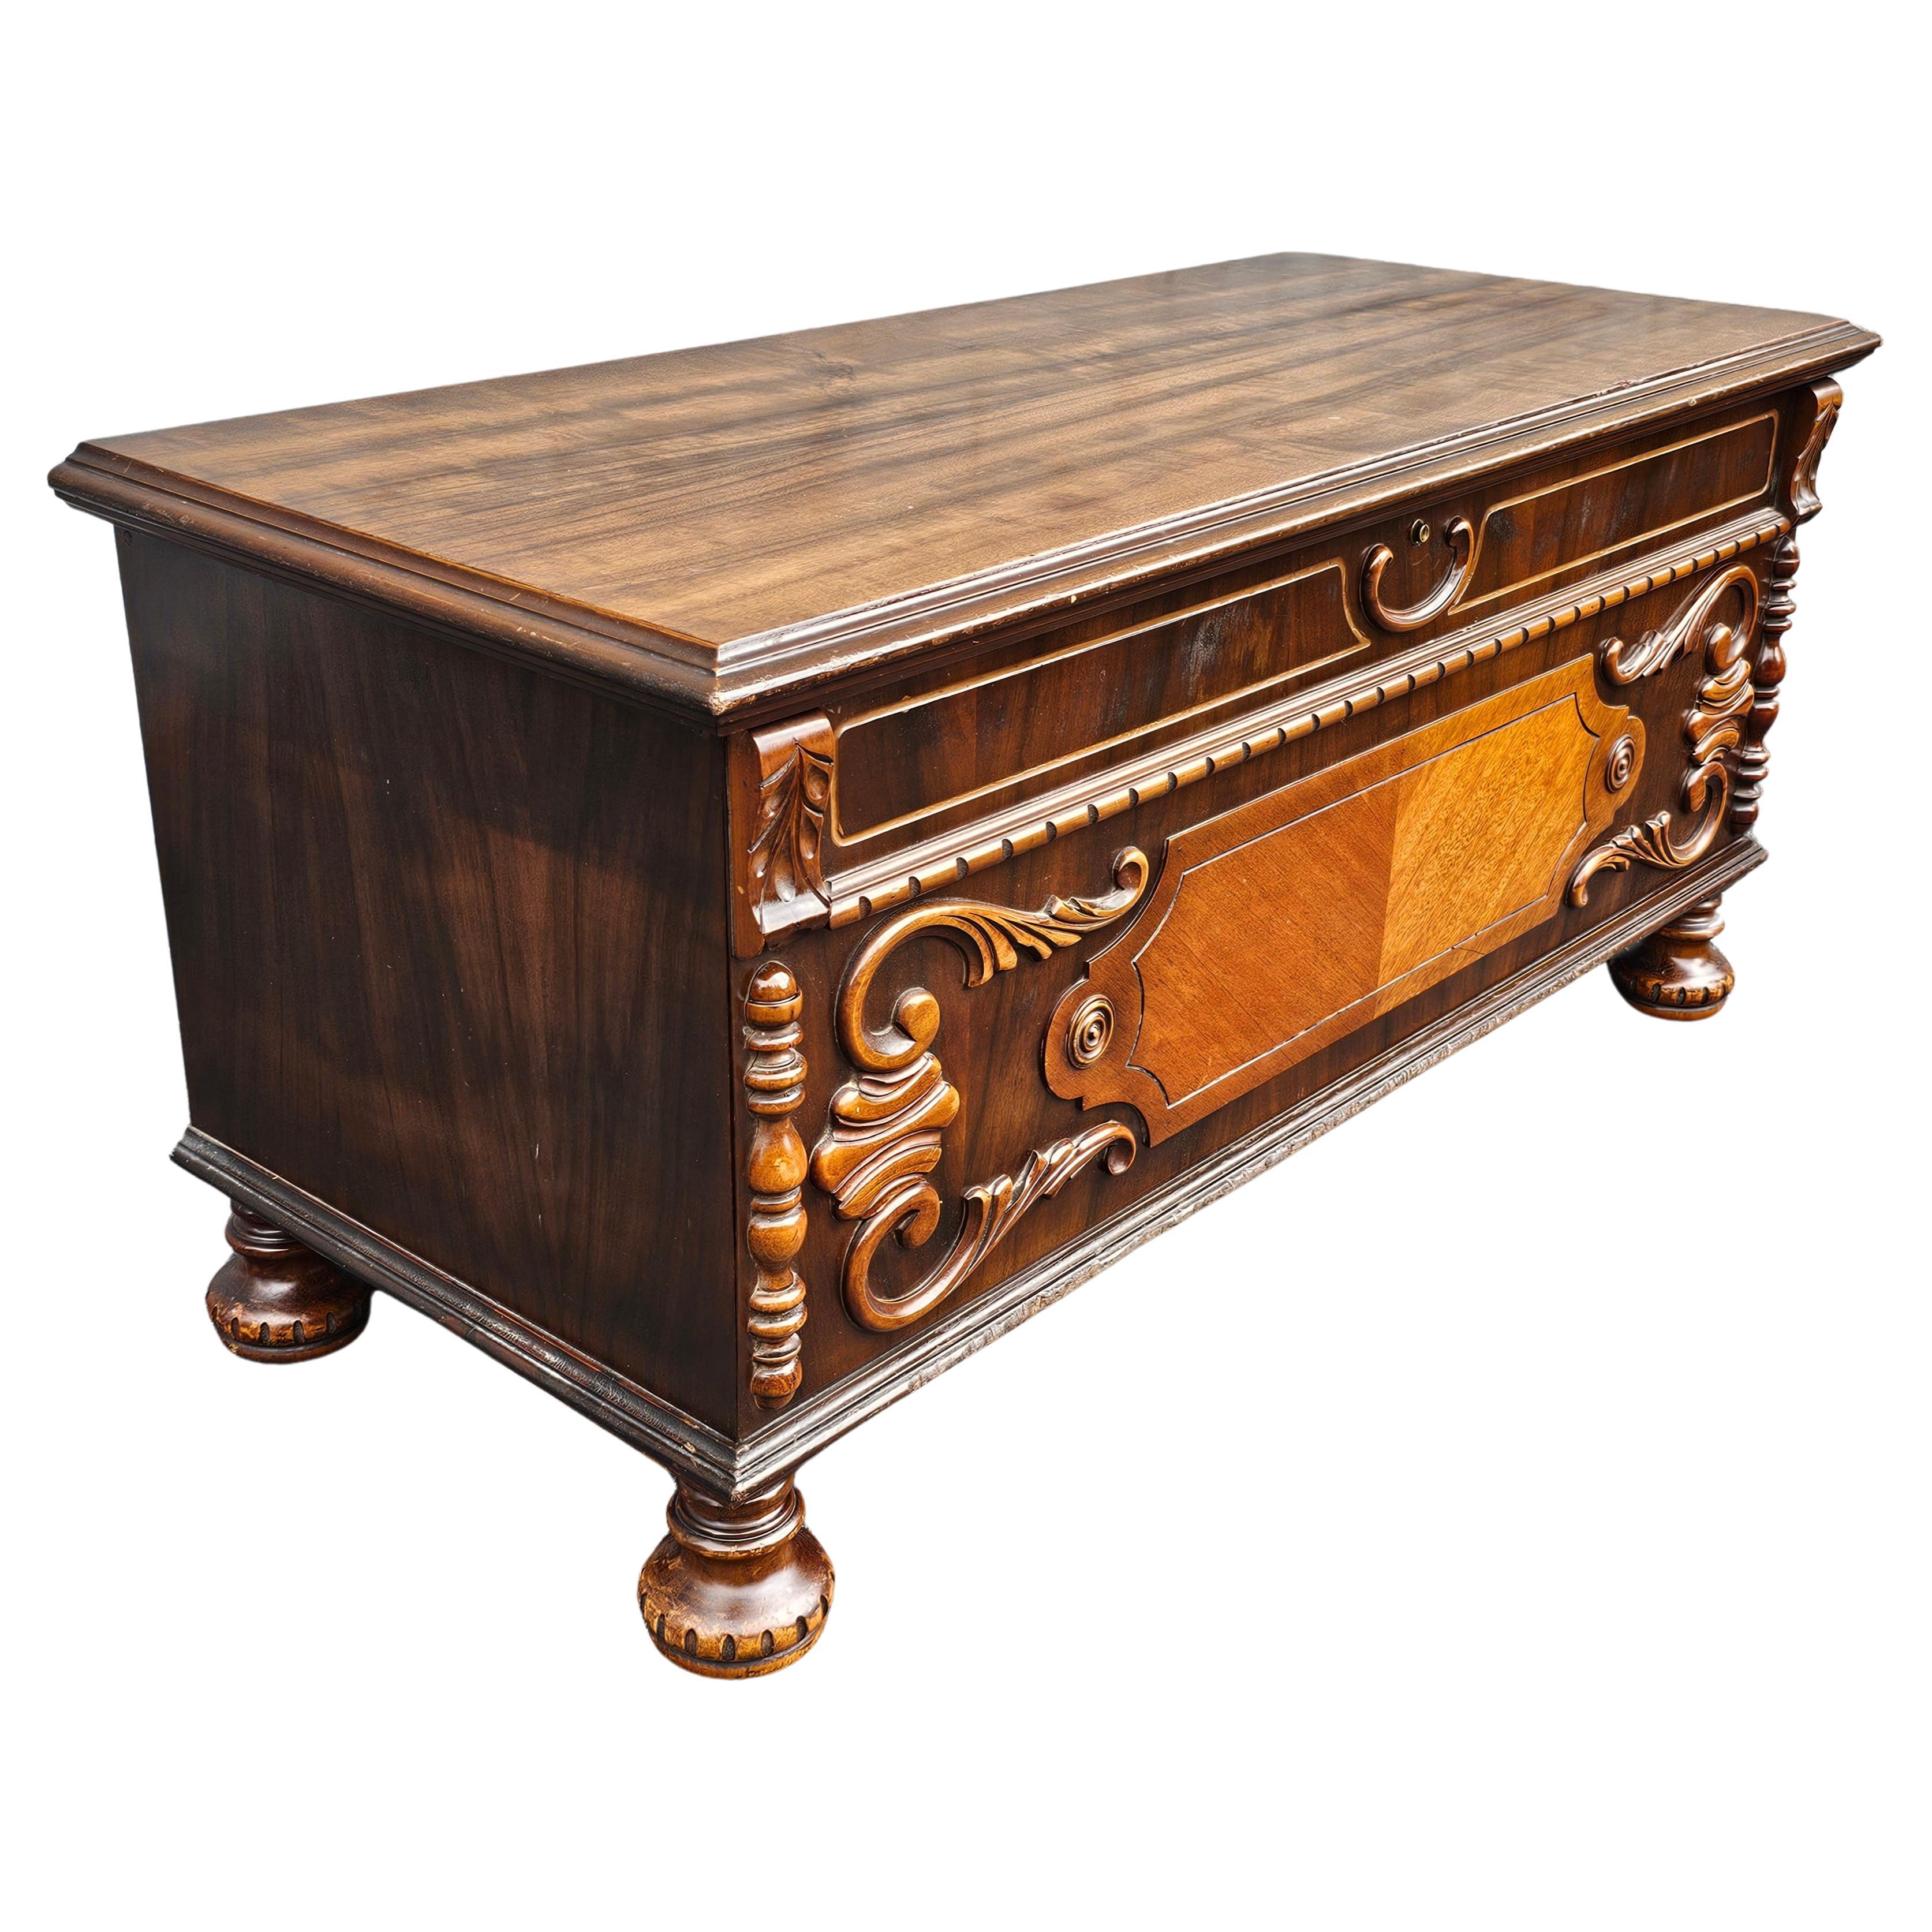 Haverty Furniture William And Mary Style Carved Mahogany and Cedar Blanket Chest In Good Condition For Sale In Germantown, MD